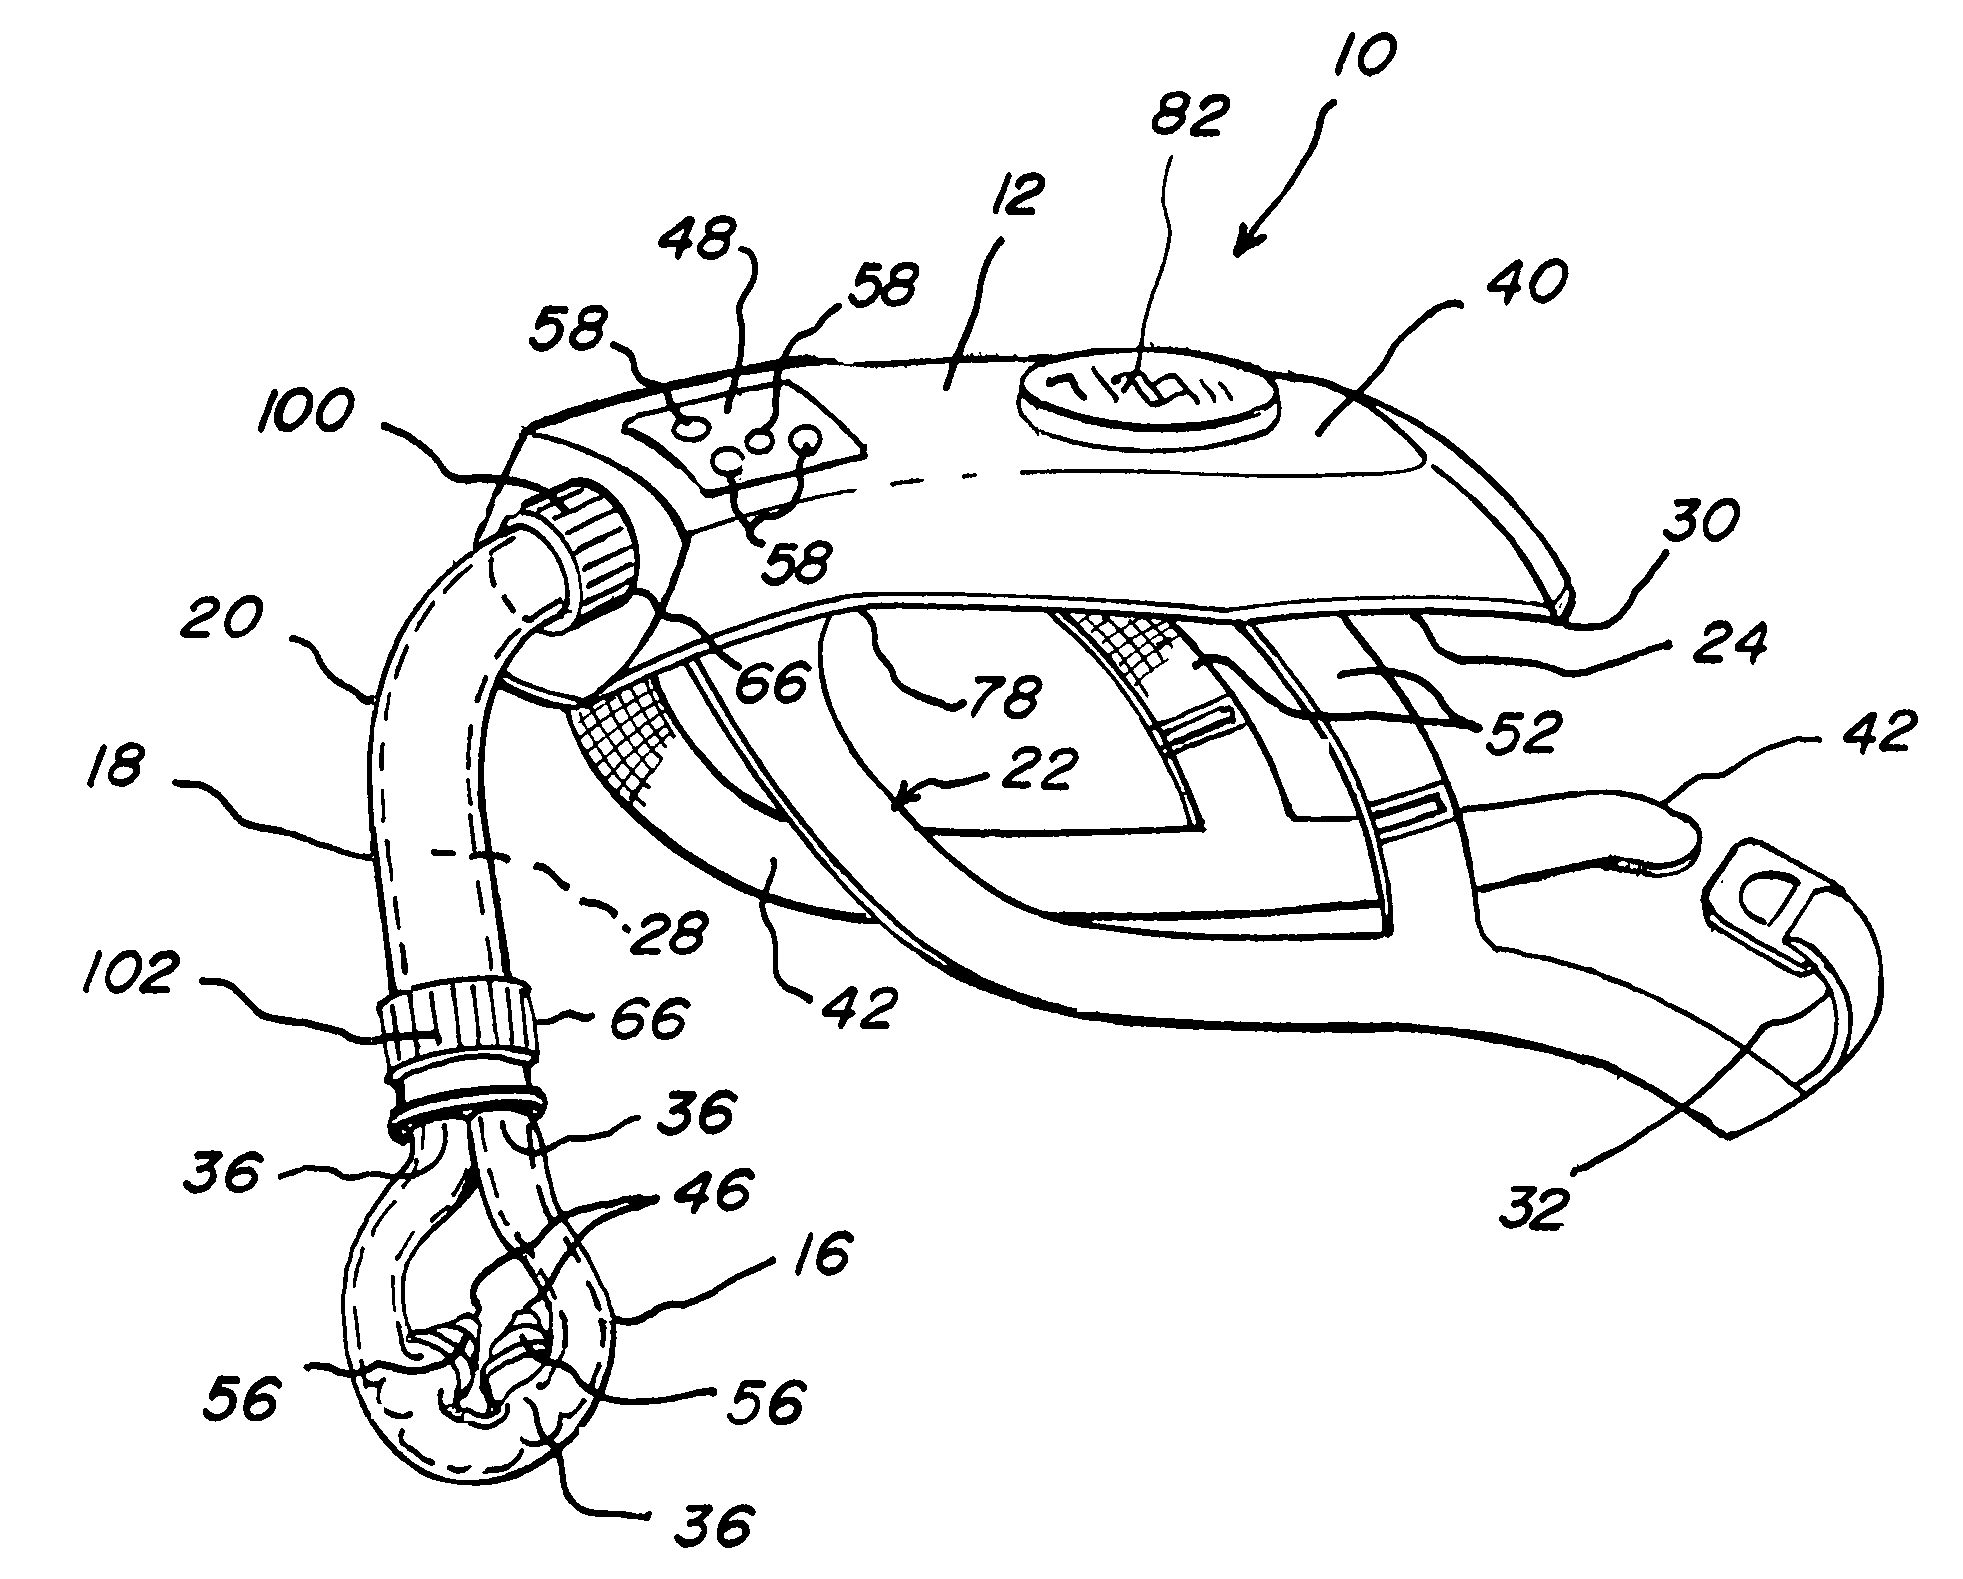 Apparatus and methods for administration of positive airway pressure therapies